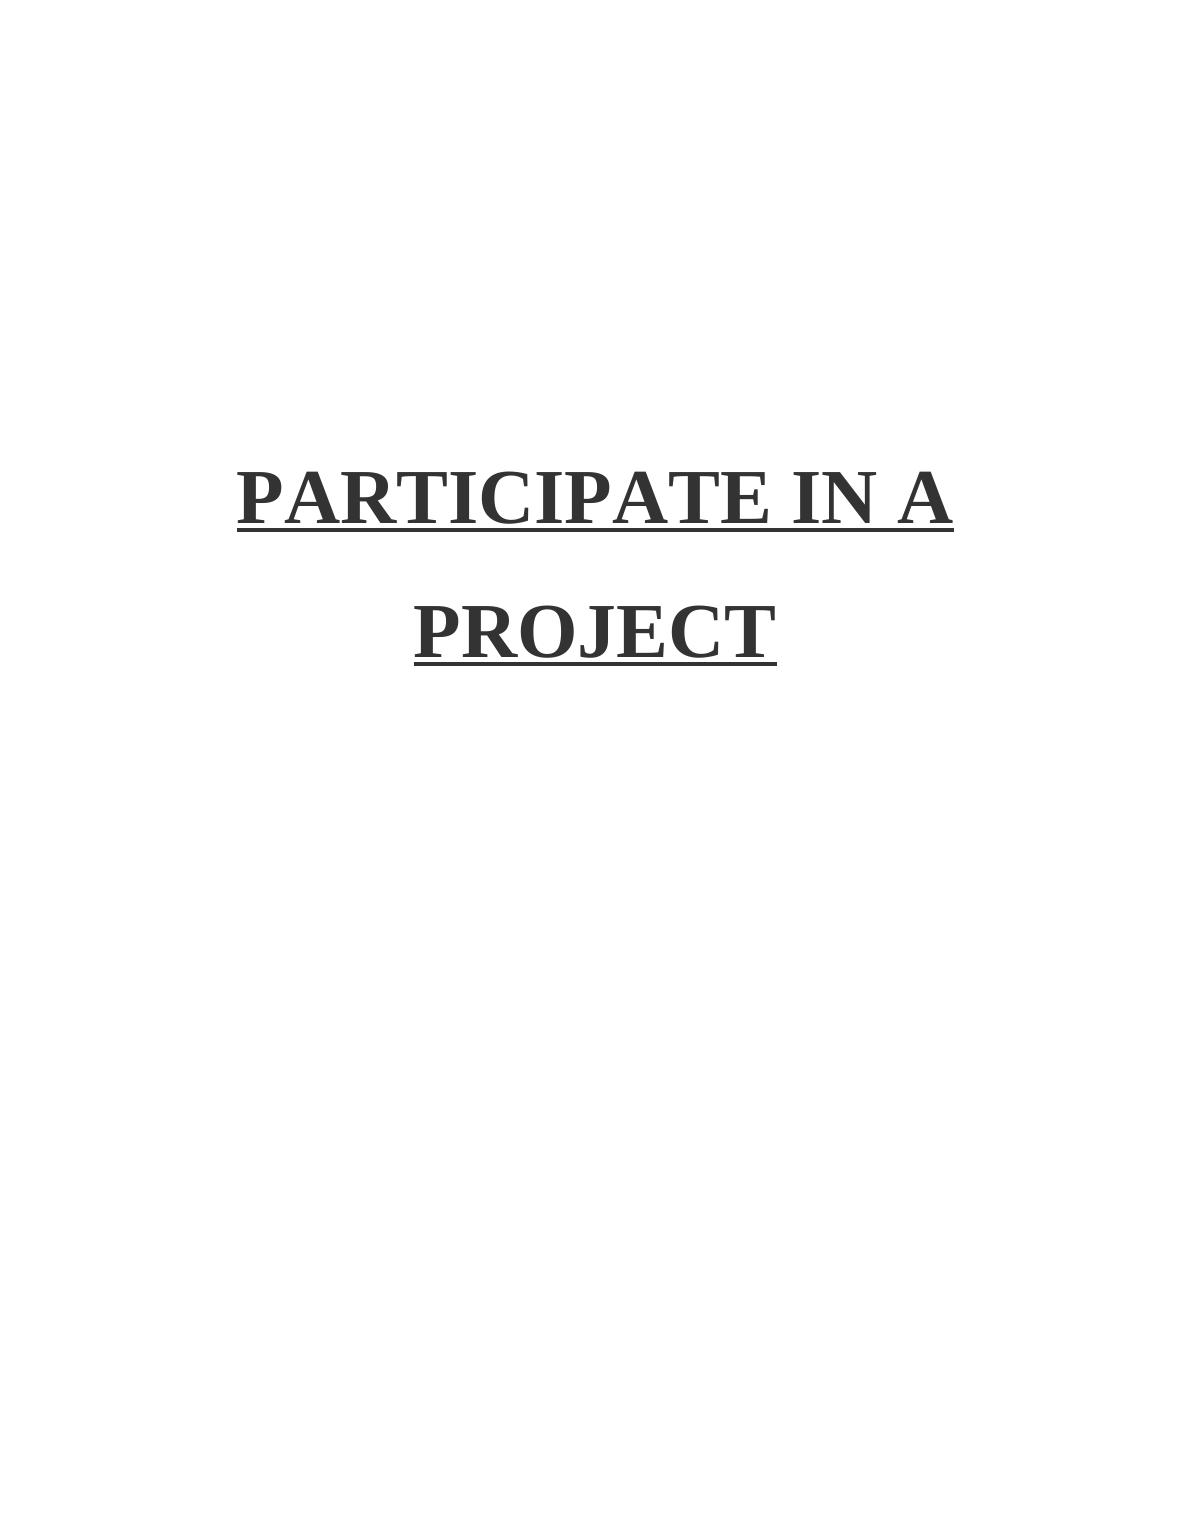 Project Business Case Assignment PDF_1